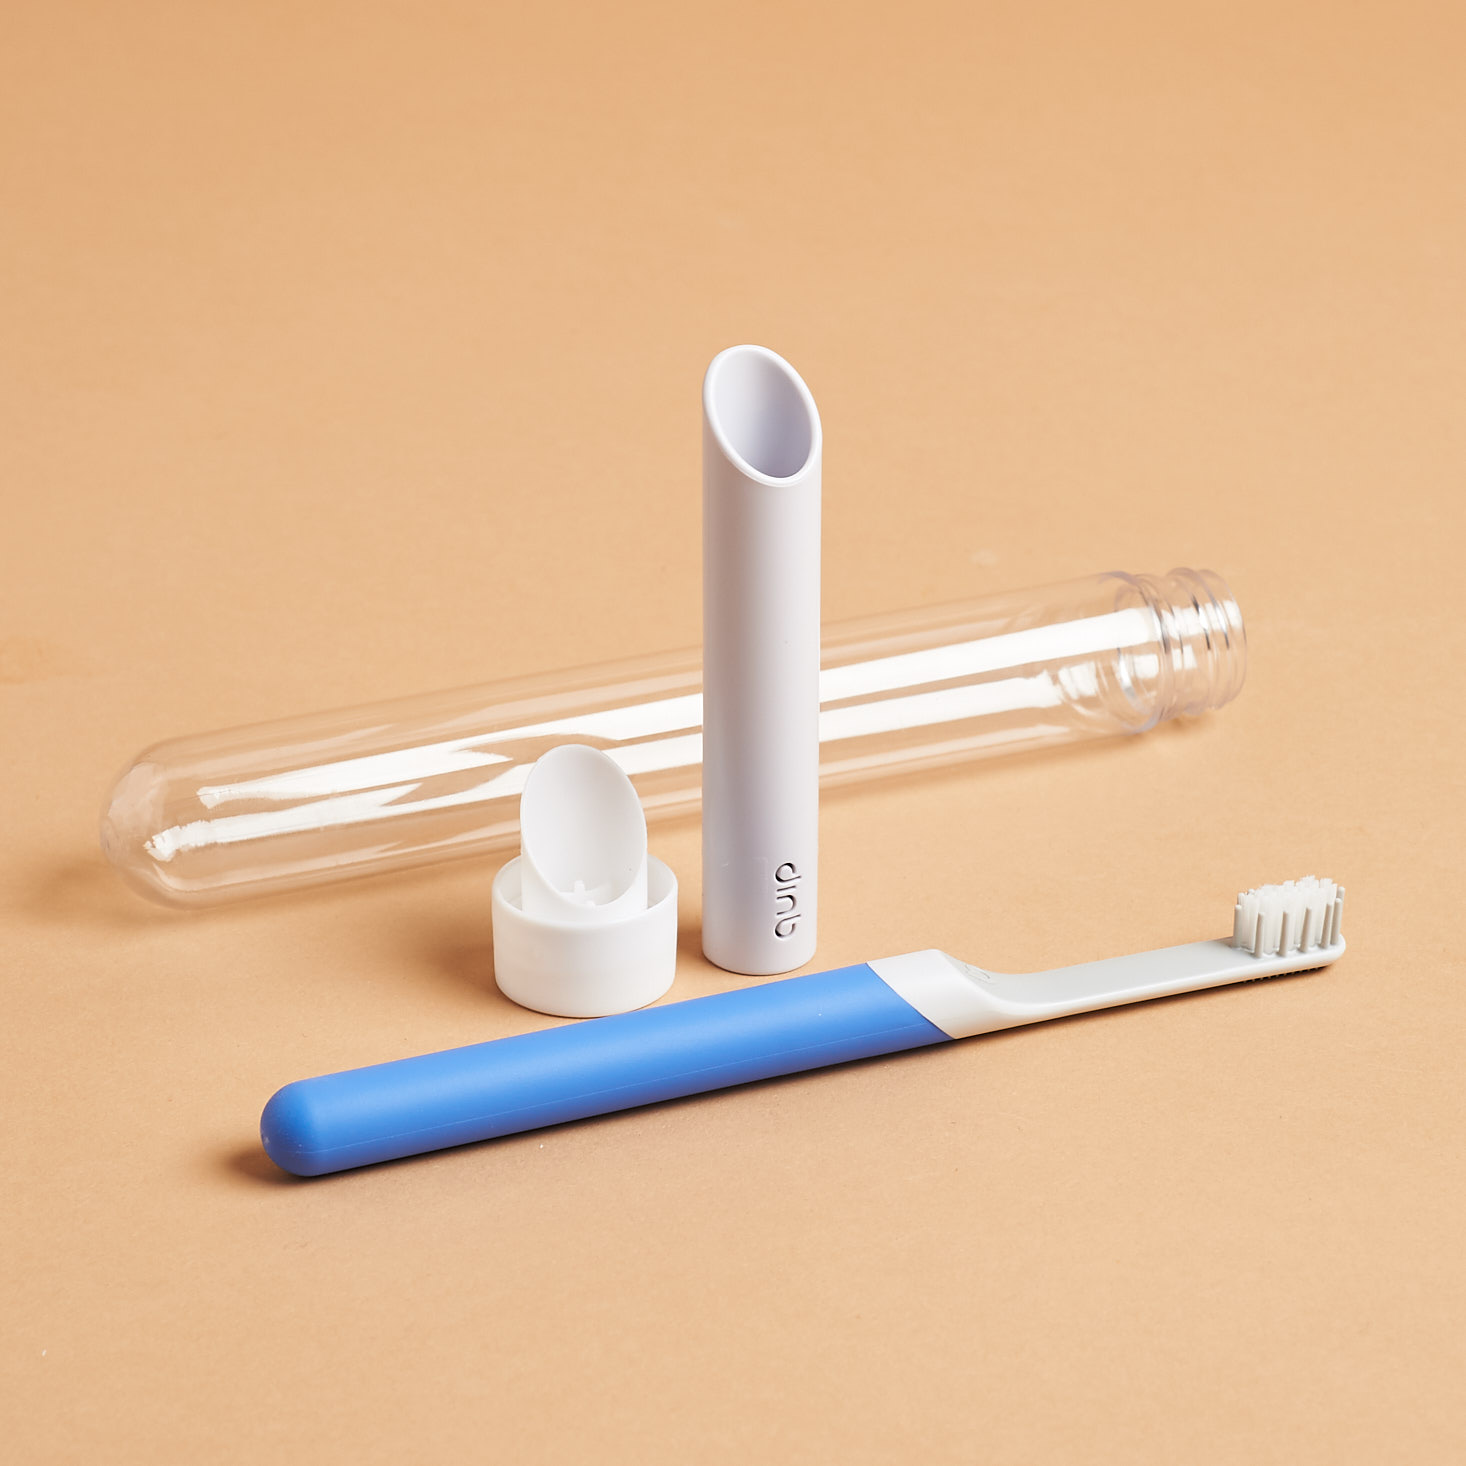 Quip Coupon: Save Up to $50 on Toothbrush Subscription This Week Only